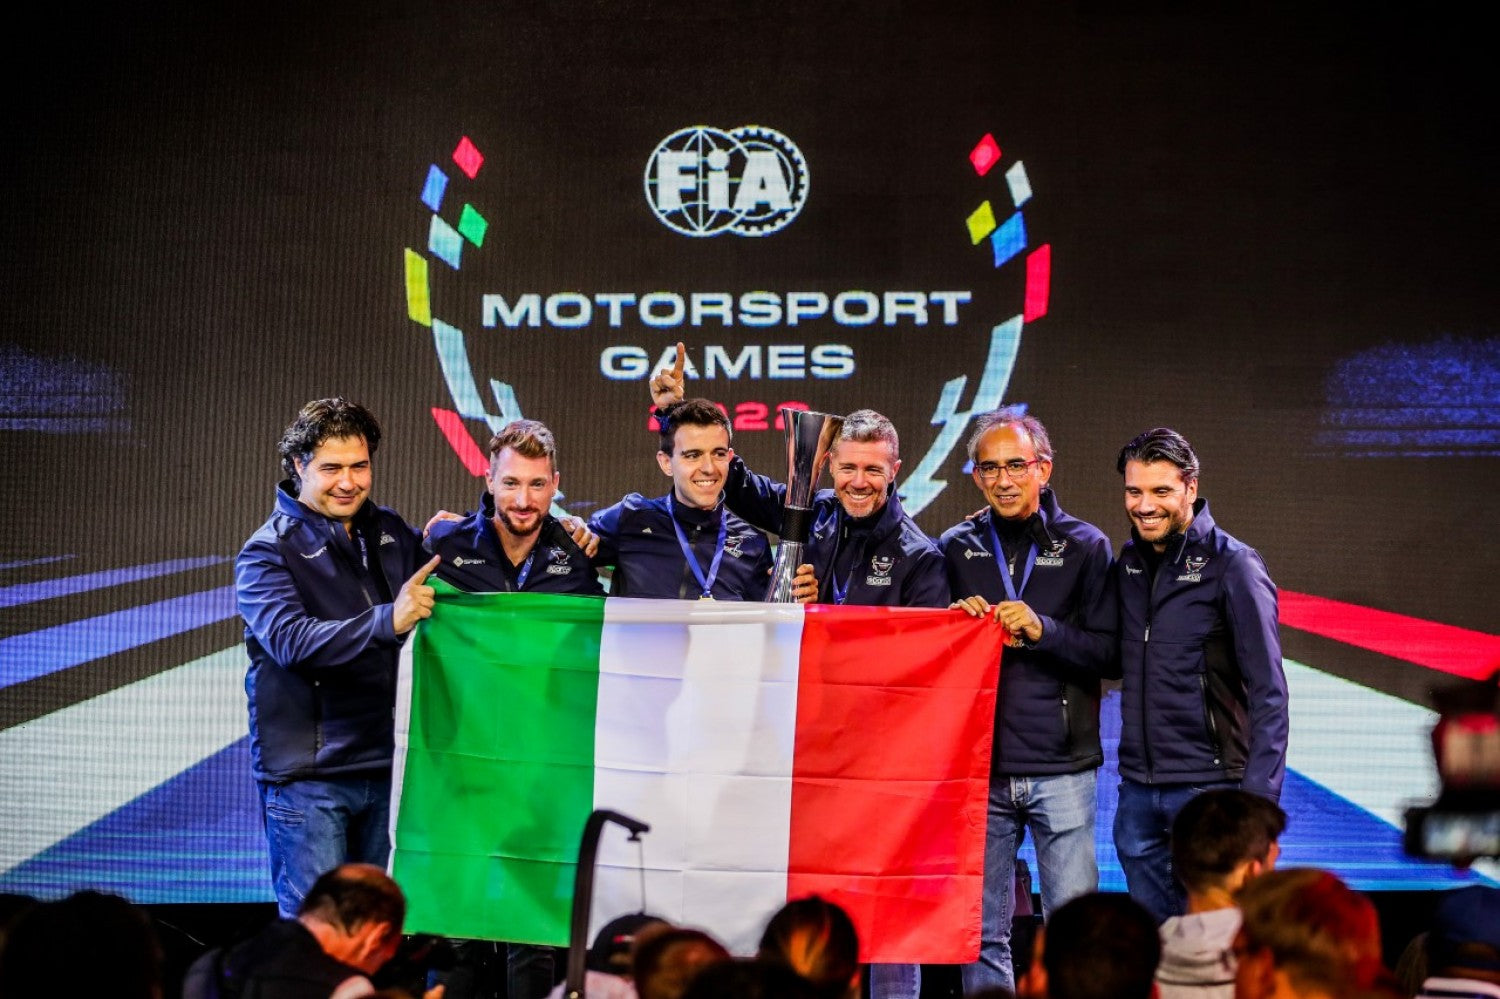 Italy wins FIA Motorsport Games, South Africa wins Regional Trophy (Africa)